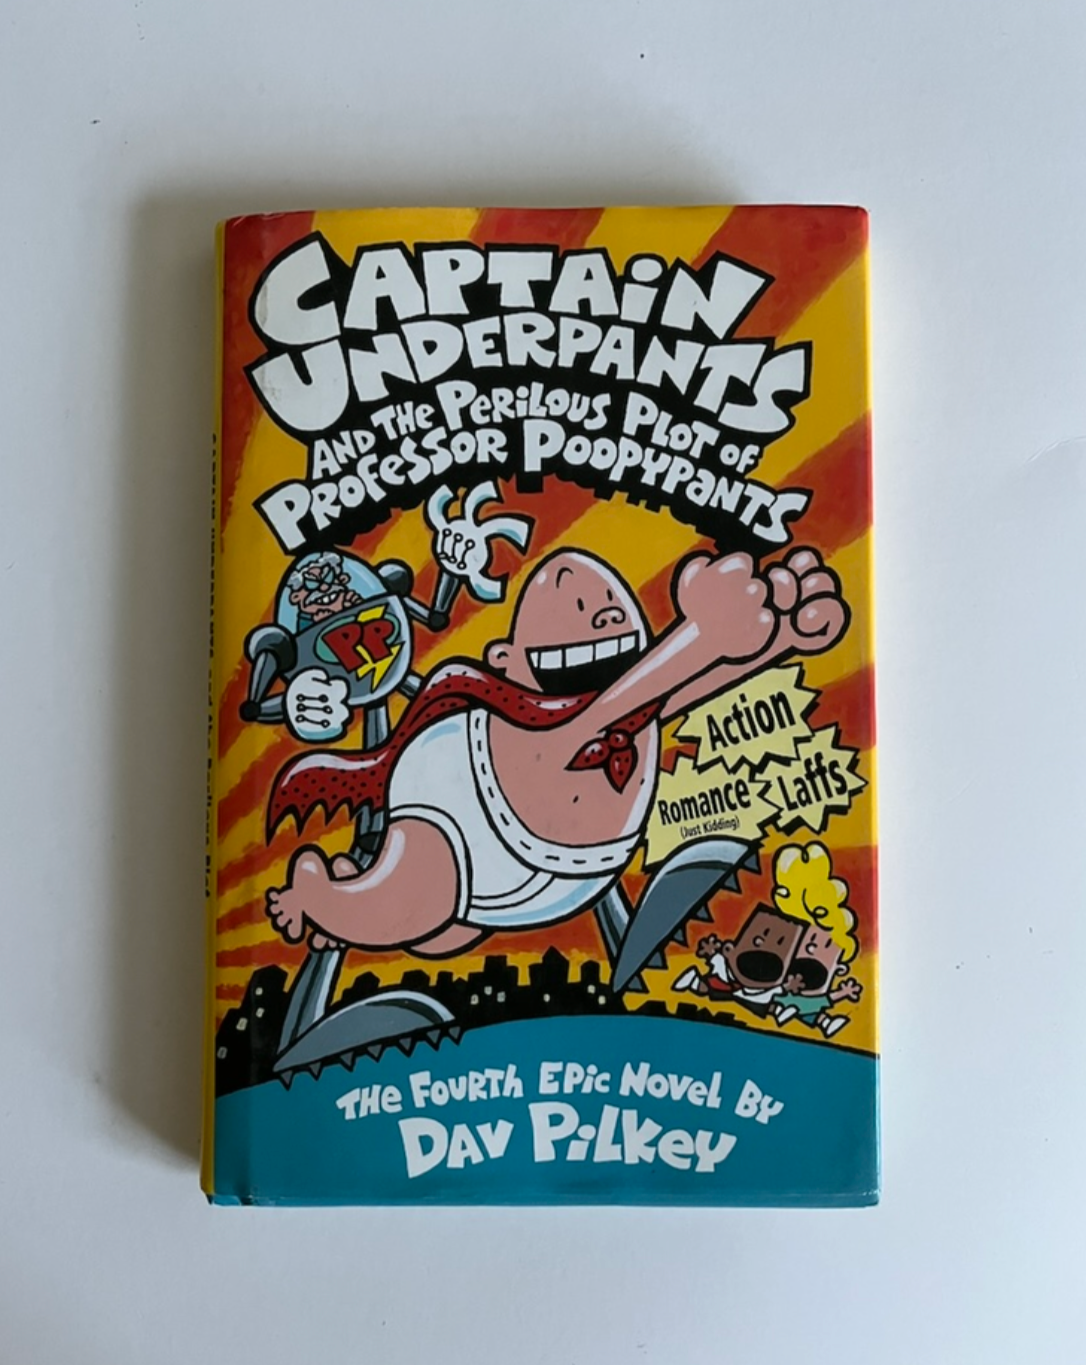 The Adventures of Captain Underpants: and The Perilous Plot of